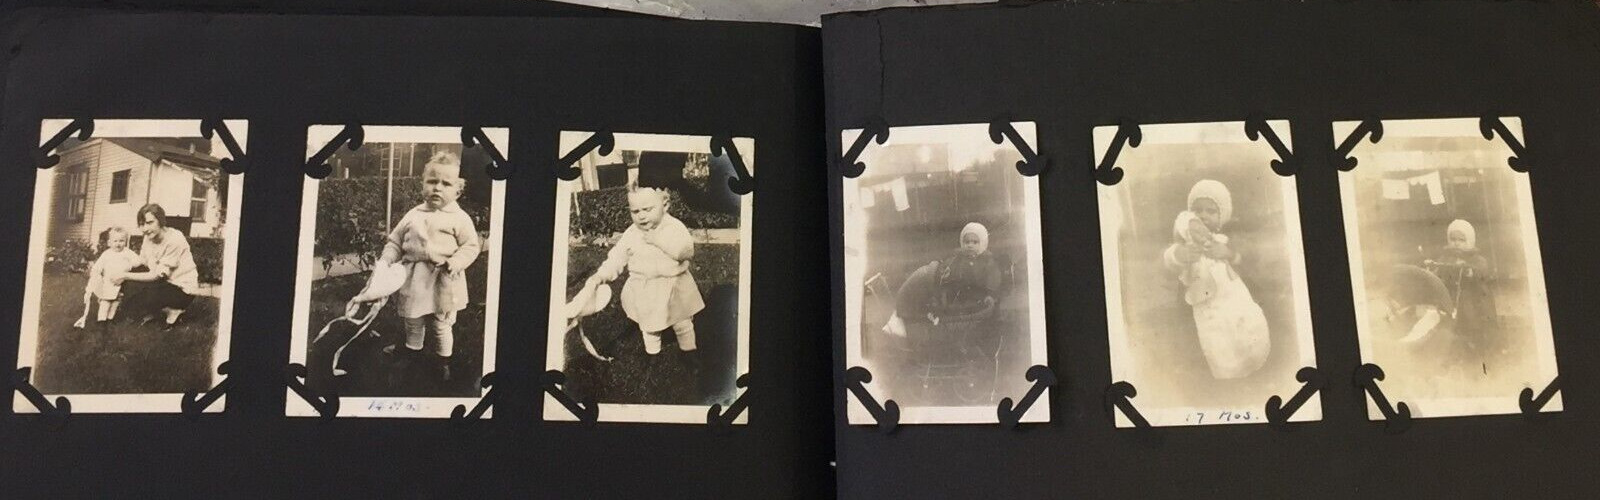 1920s Toddler with Mom and Carriage Lot of 6 Photographs